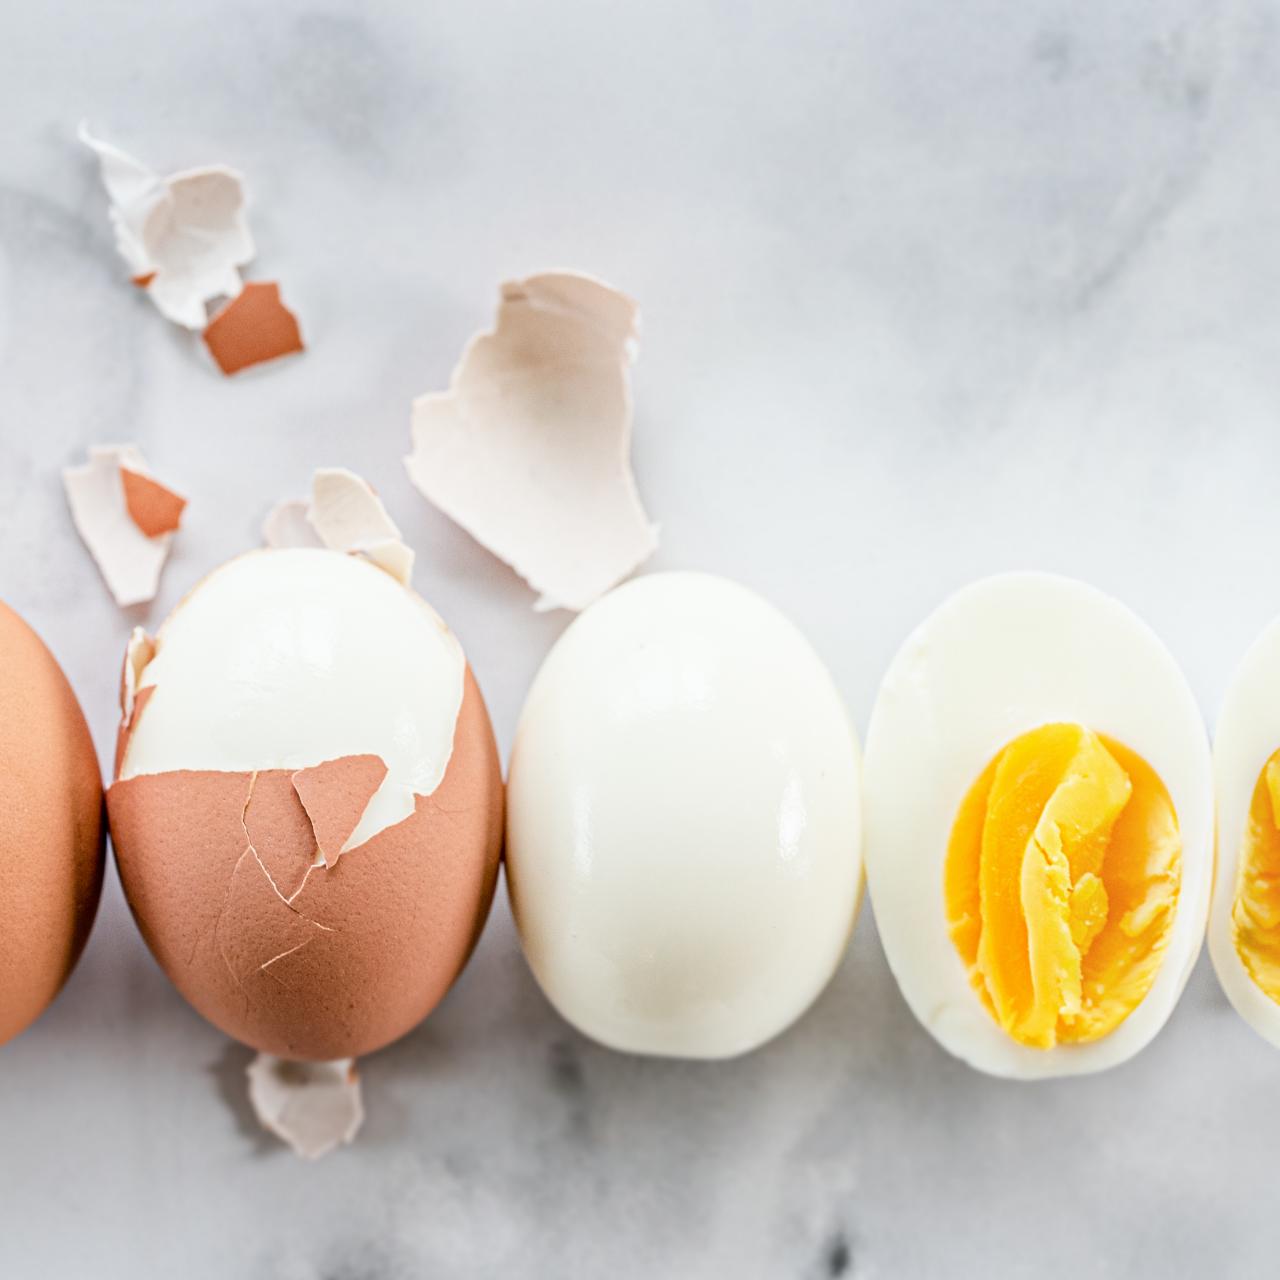 Are Eggs Online Fresh? How Can You Be Sure? Here's How You Can Tell!